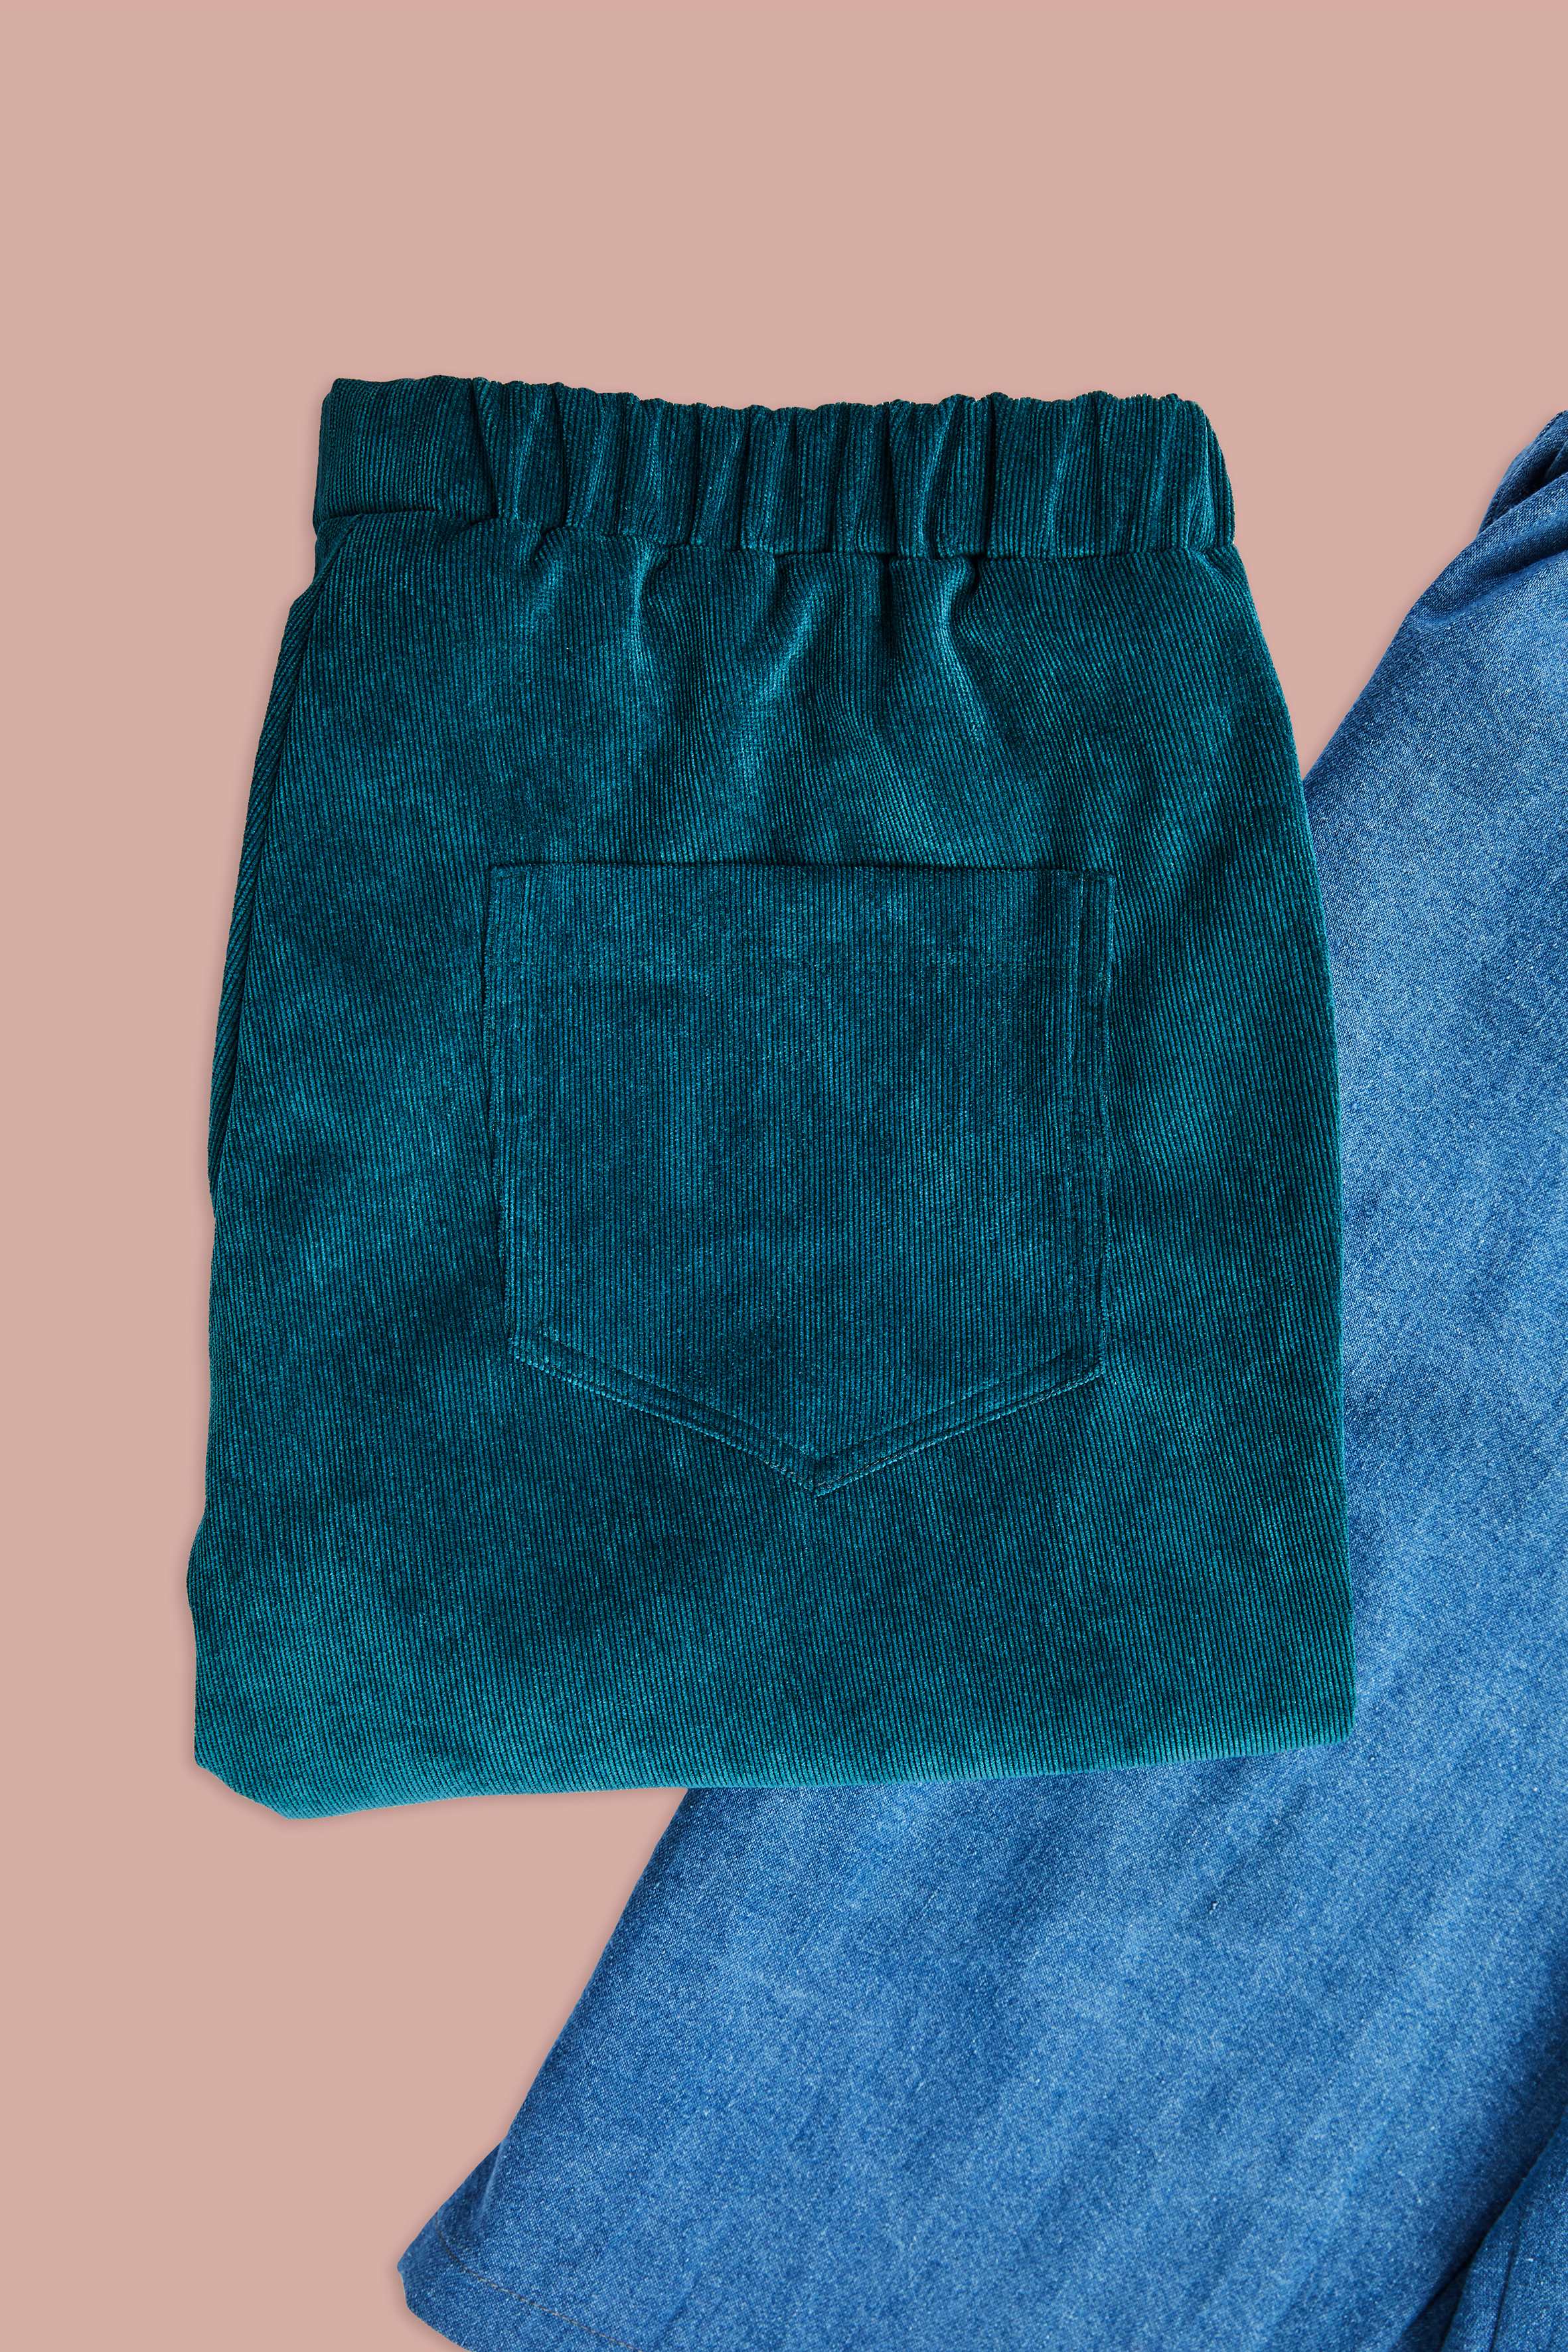 folded up corduroy pants and detailed view of jeans pants